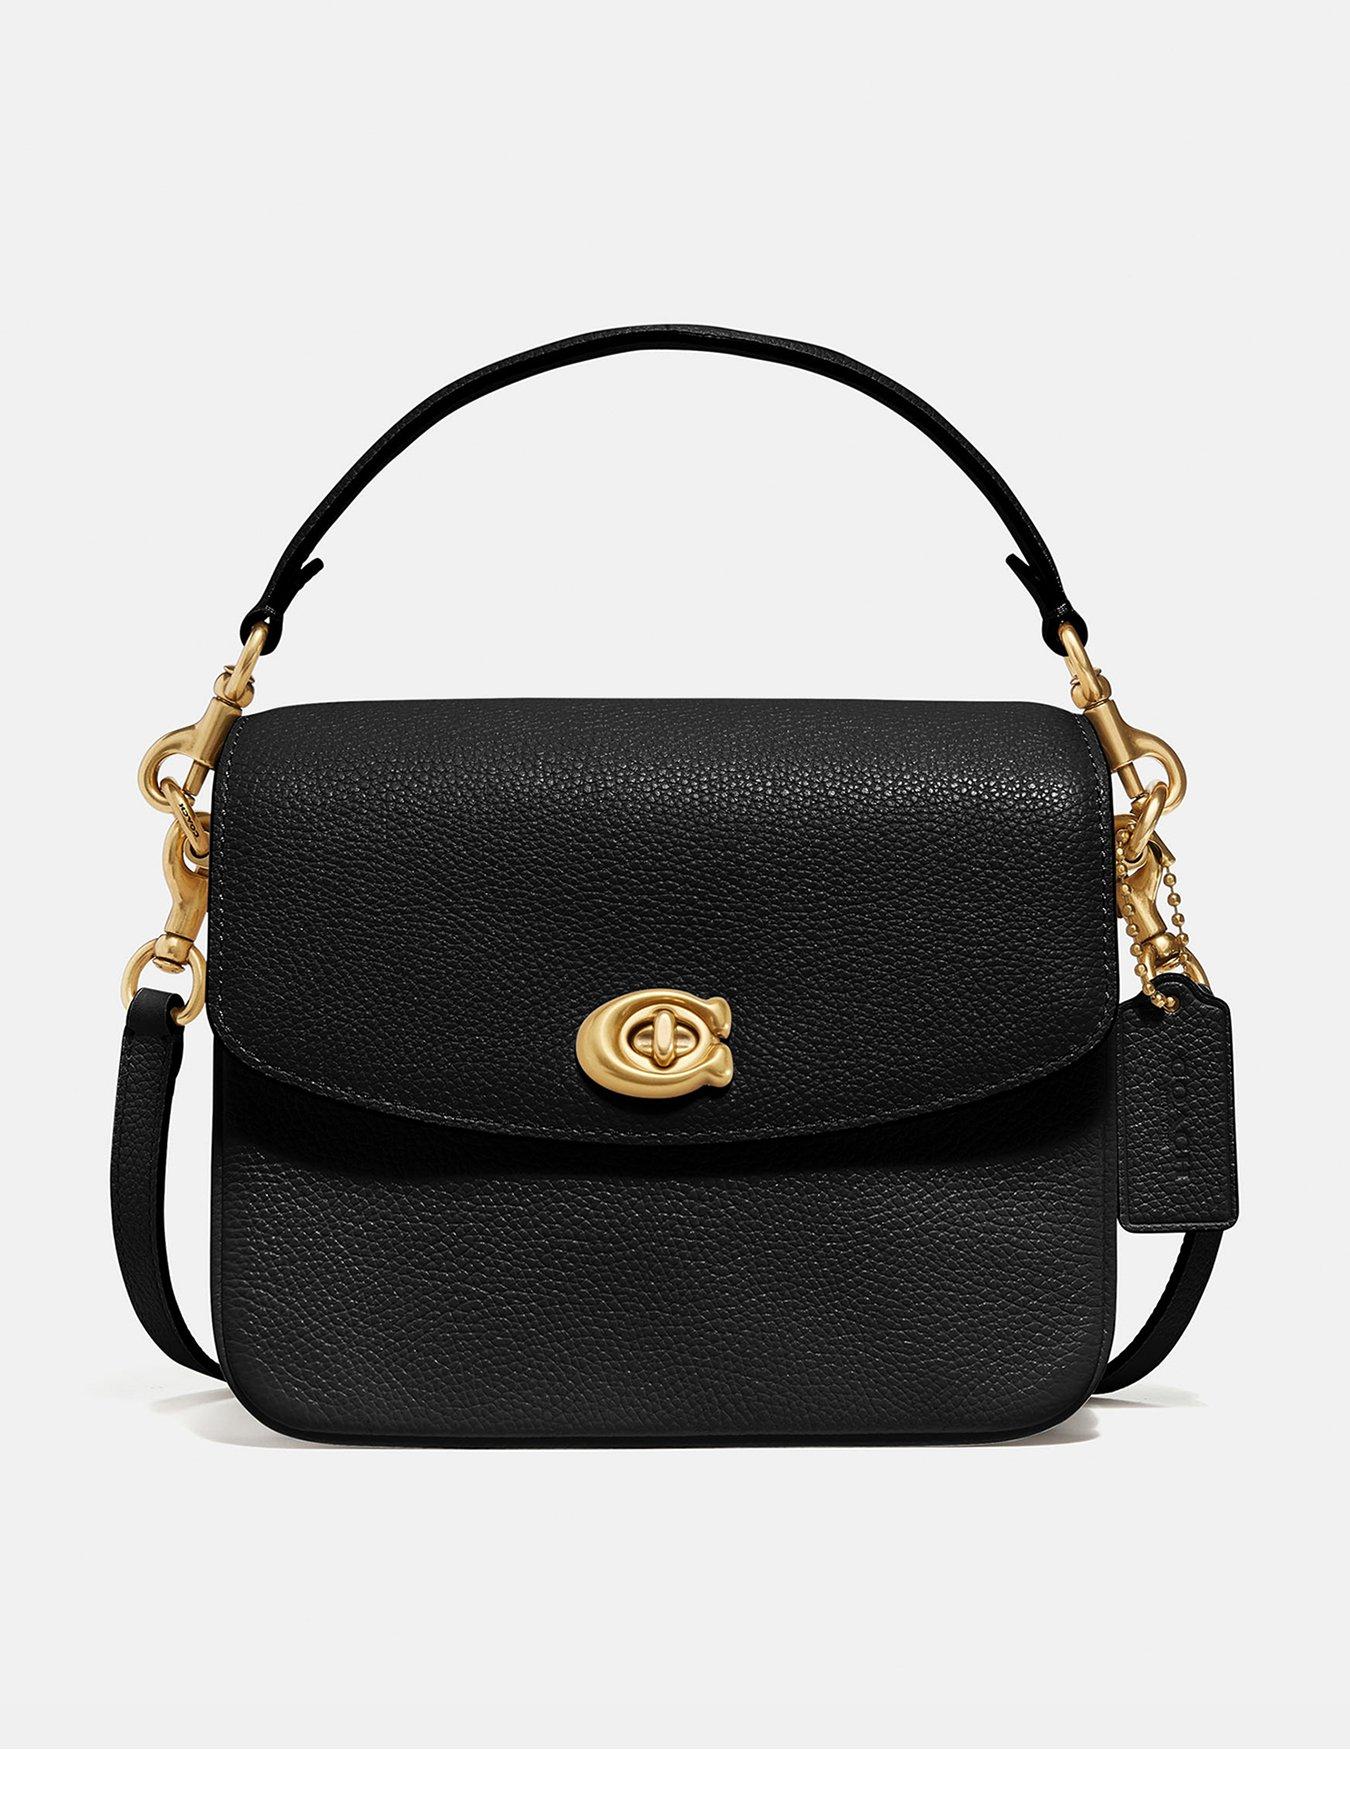 COACH Cassie 19 Polished Pebbled Leather Cross-body Bag - Black